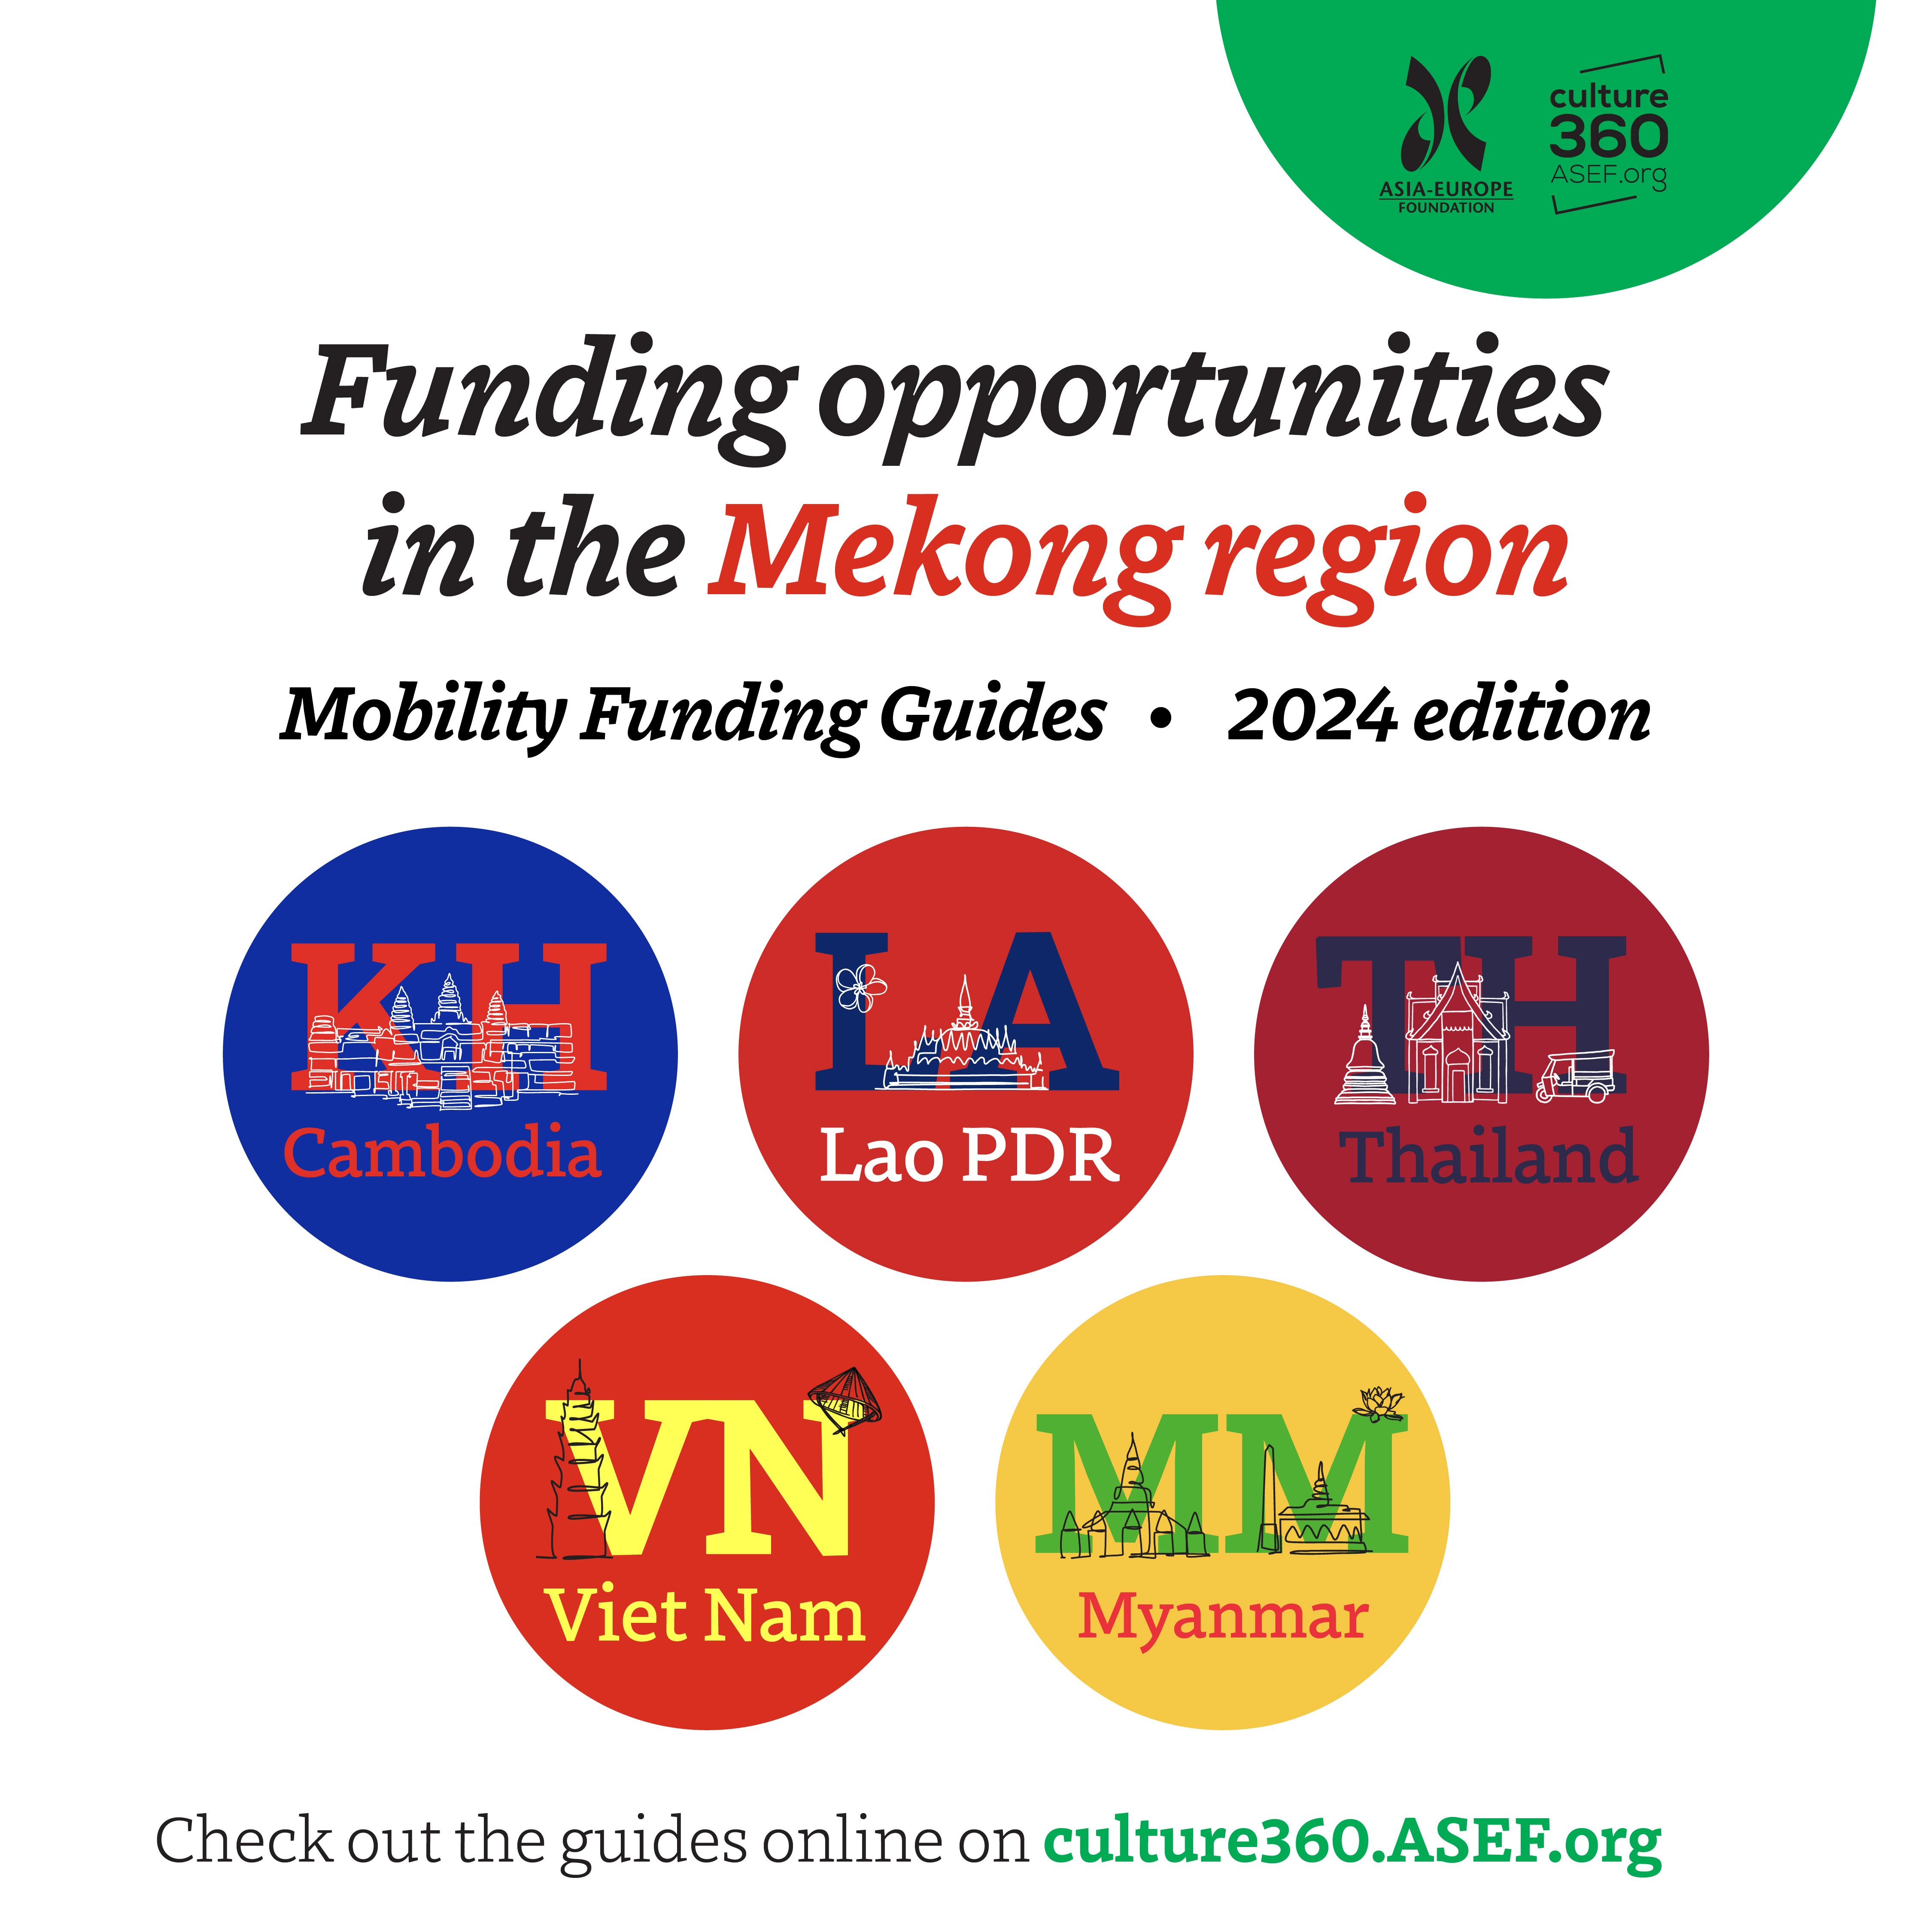 Mobility Funding Guides for Mekong Region | 2024 Edition Launched!